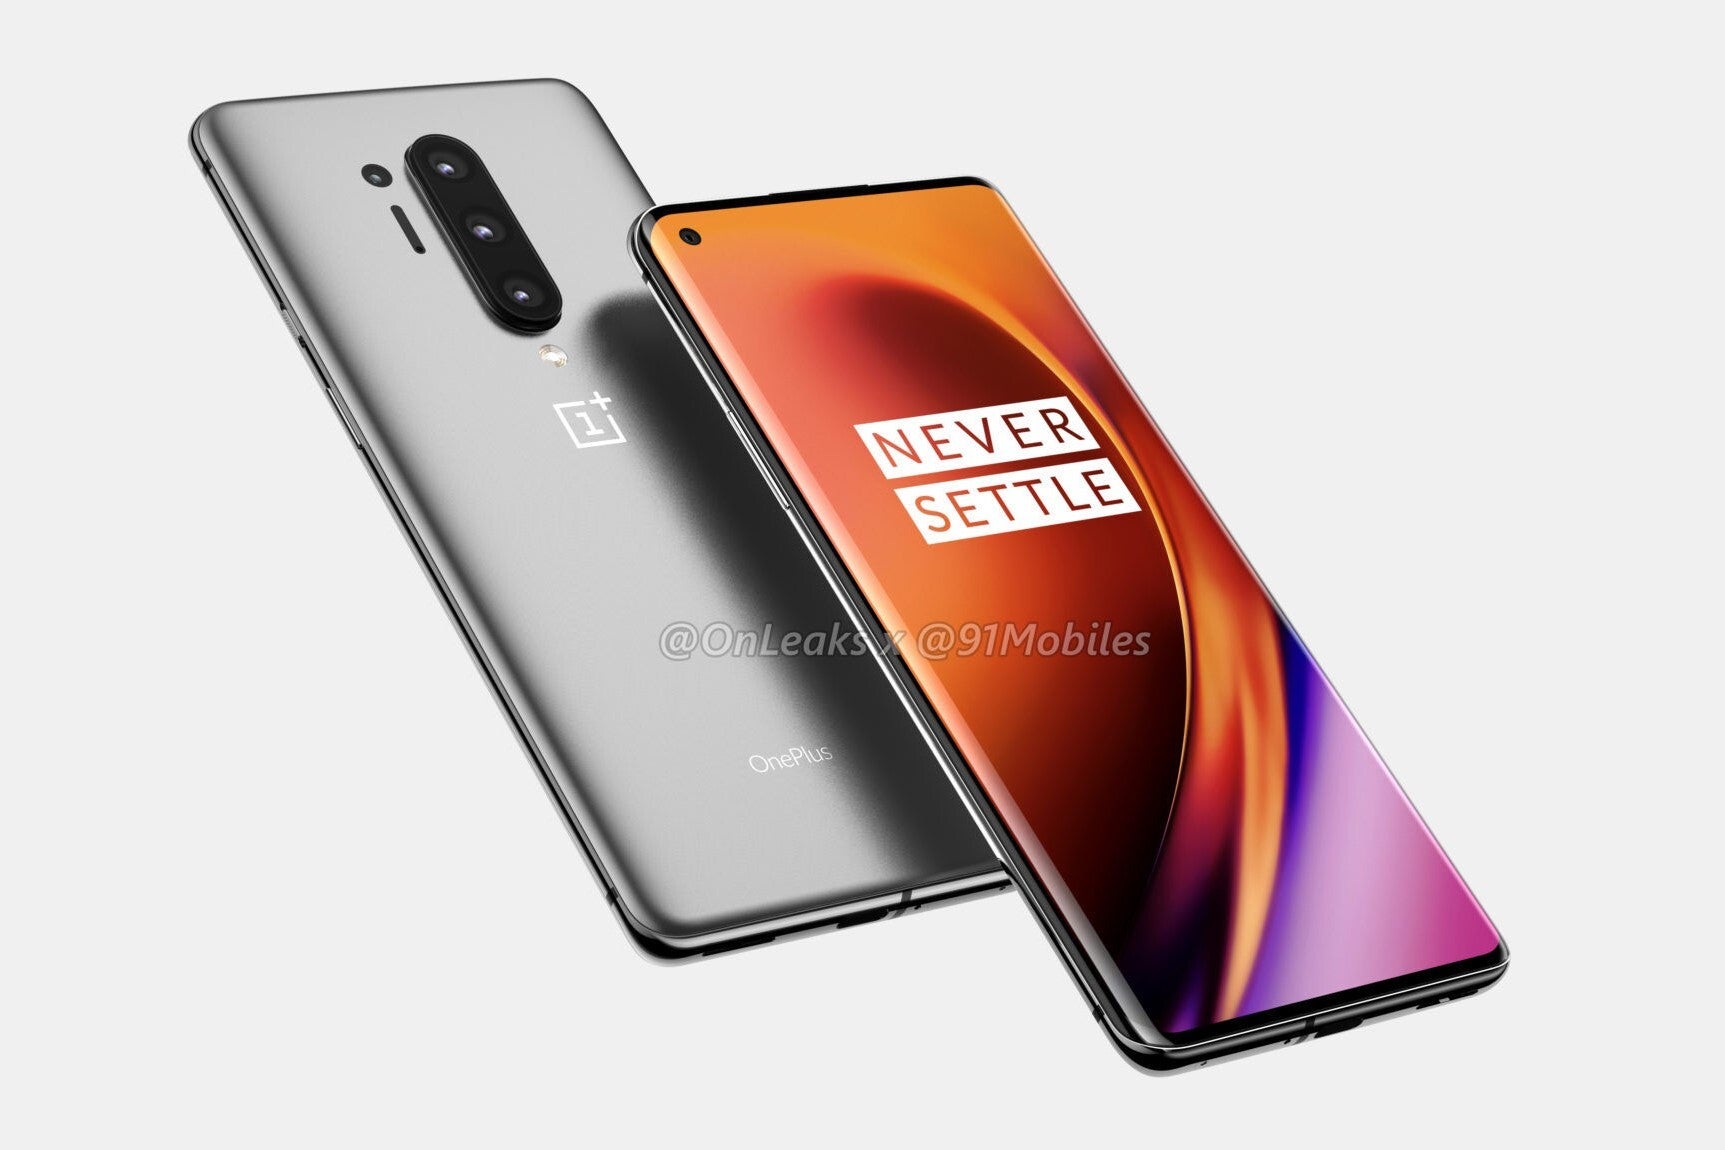 OnePlus 8 Pro CAD-based render - The OnePlus 8 Pro may feature a super smooth 120Hz display